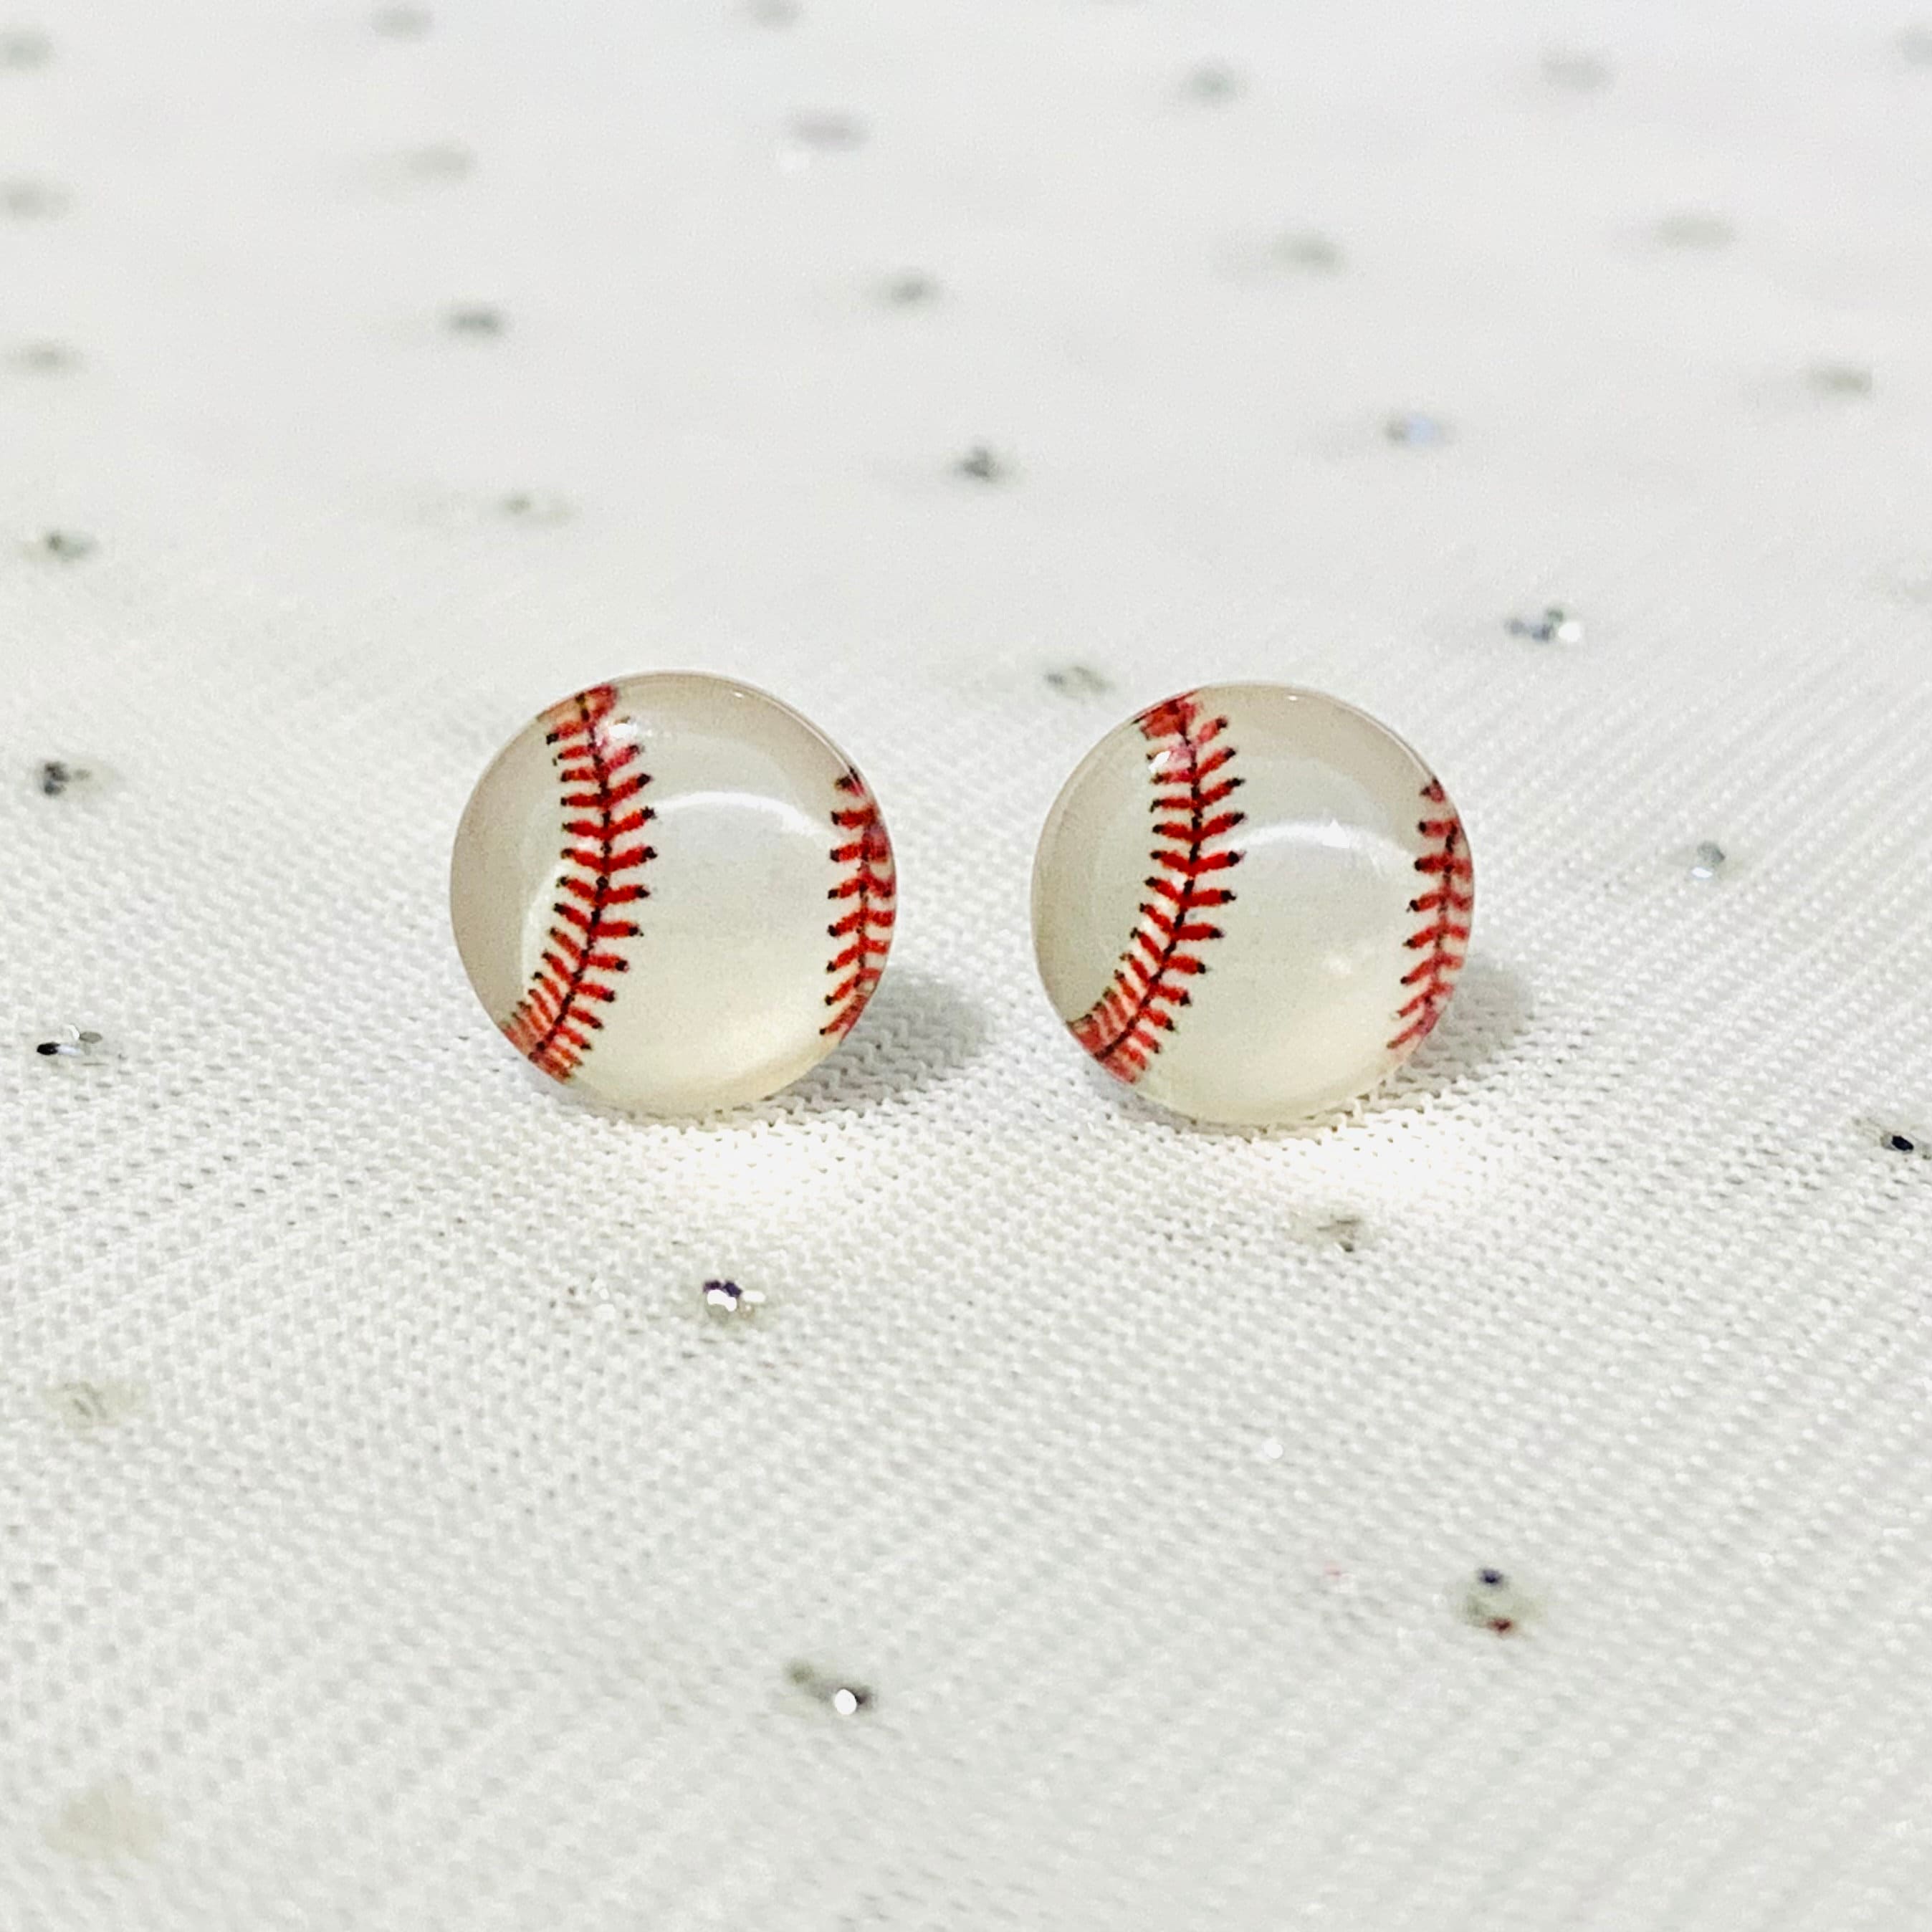 Chic Baseball-Shaped Stud Earrings for Someone Special